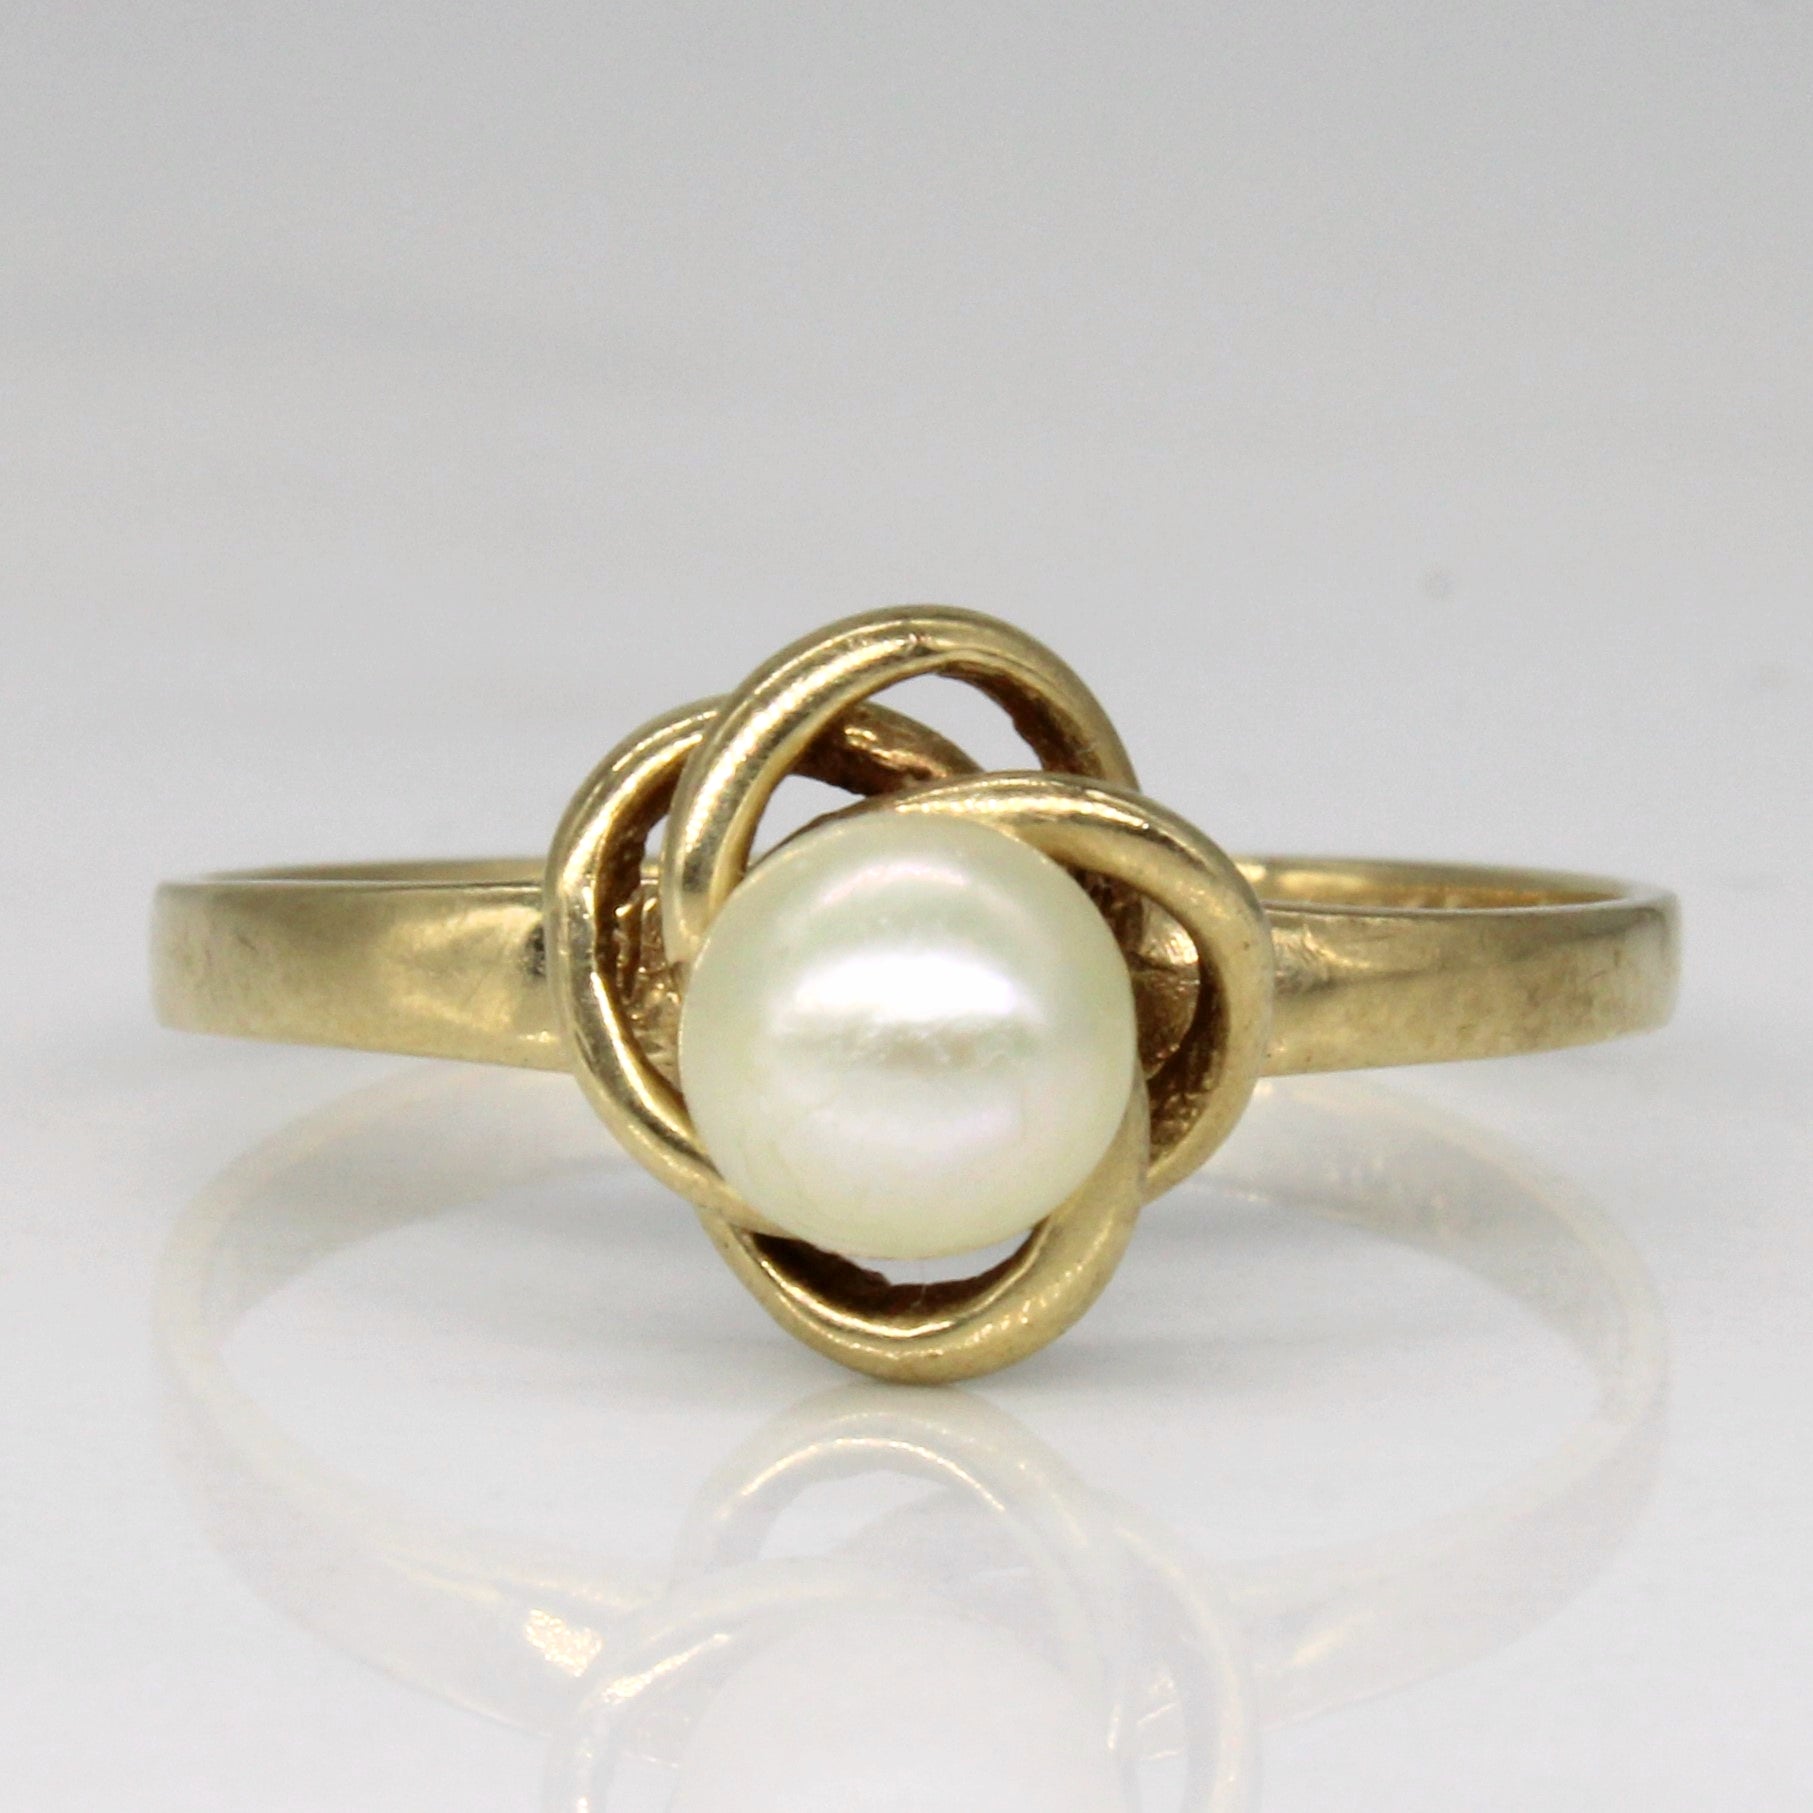 Pearl Knot Ring | SZ 7.25 |